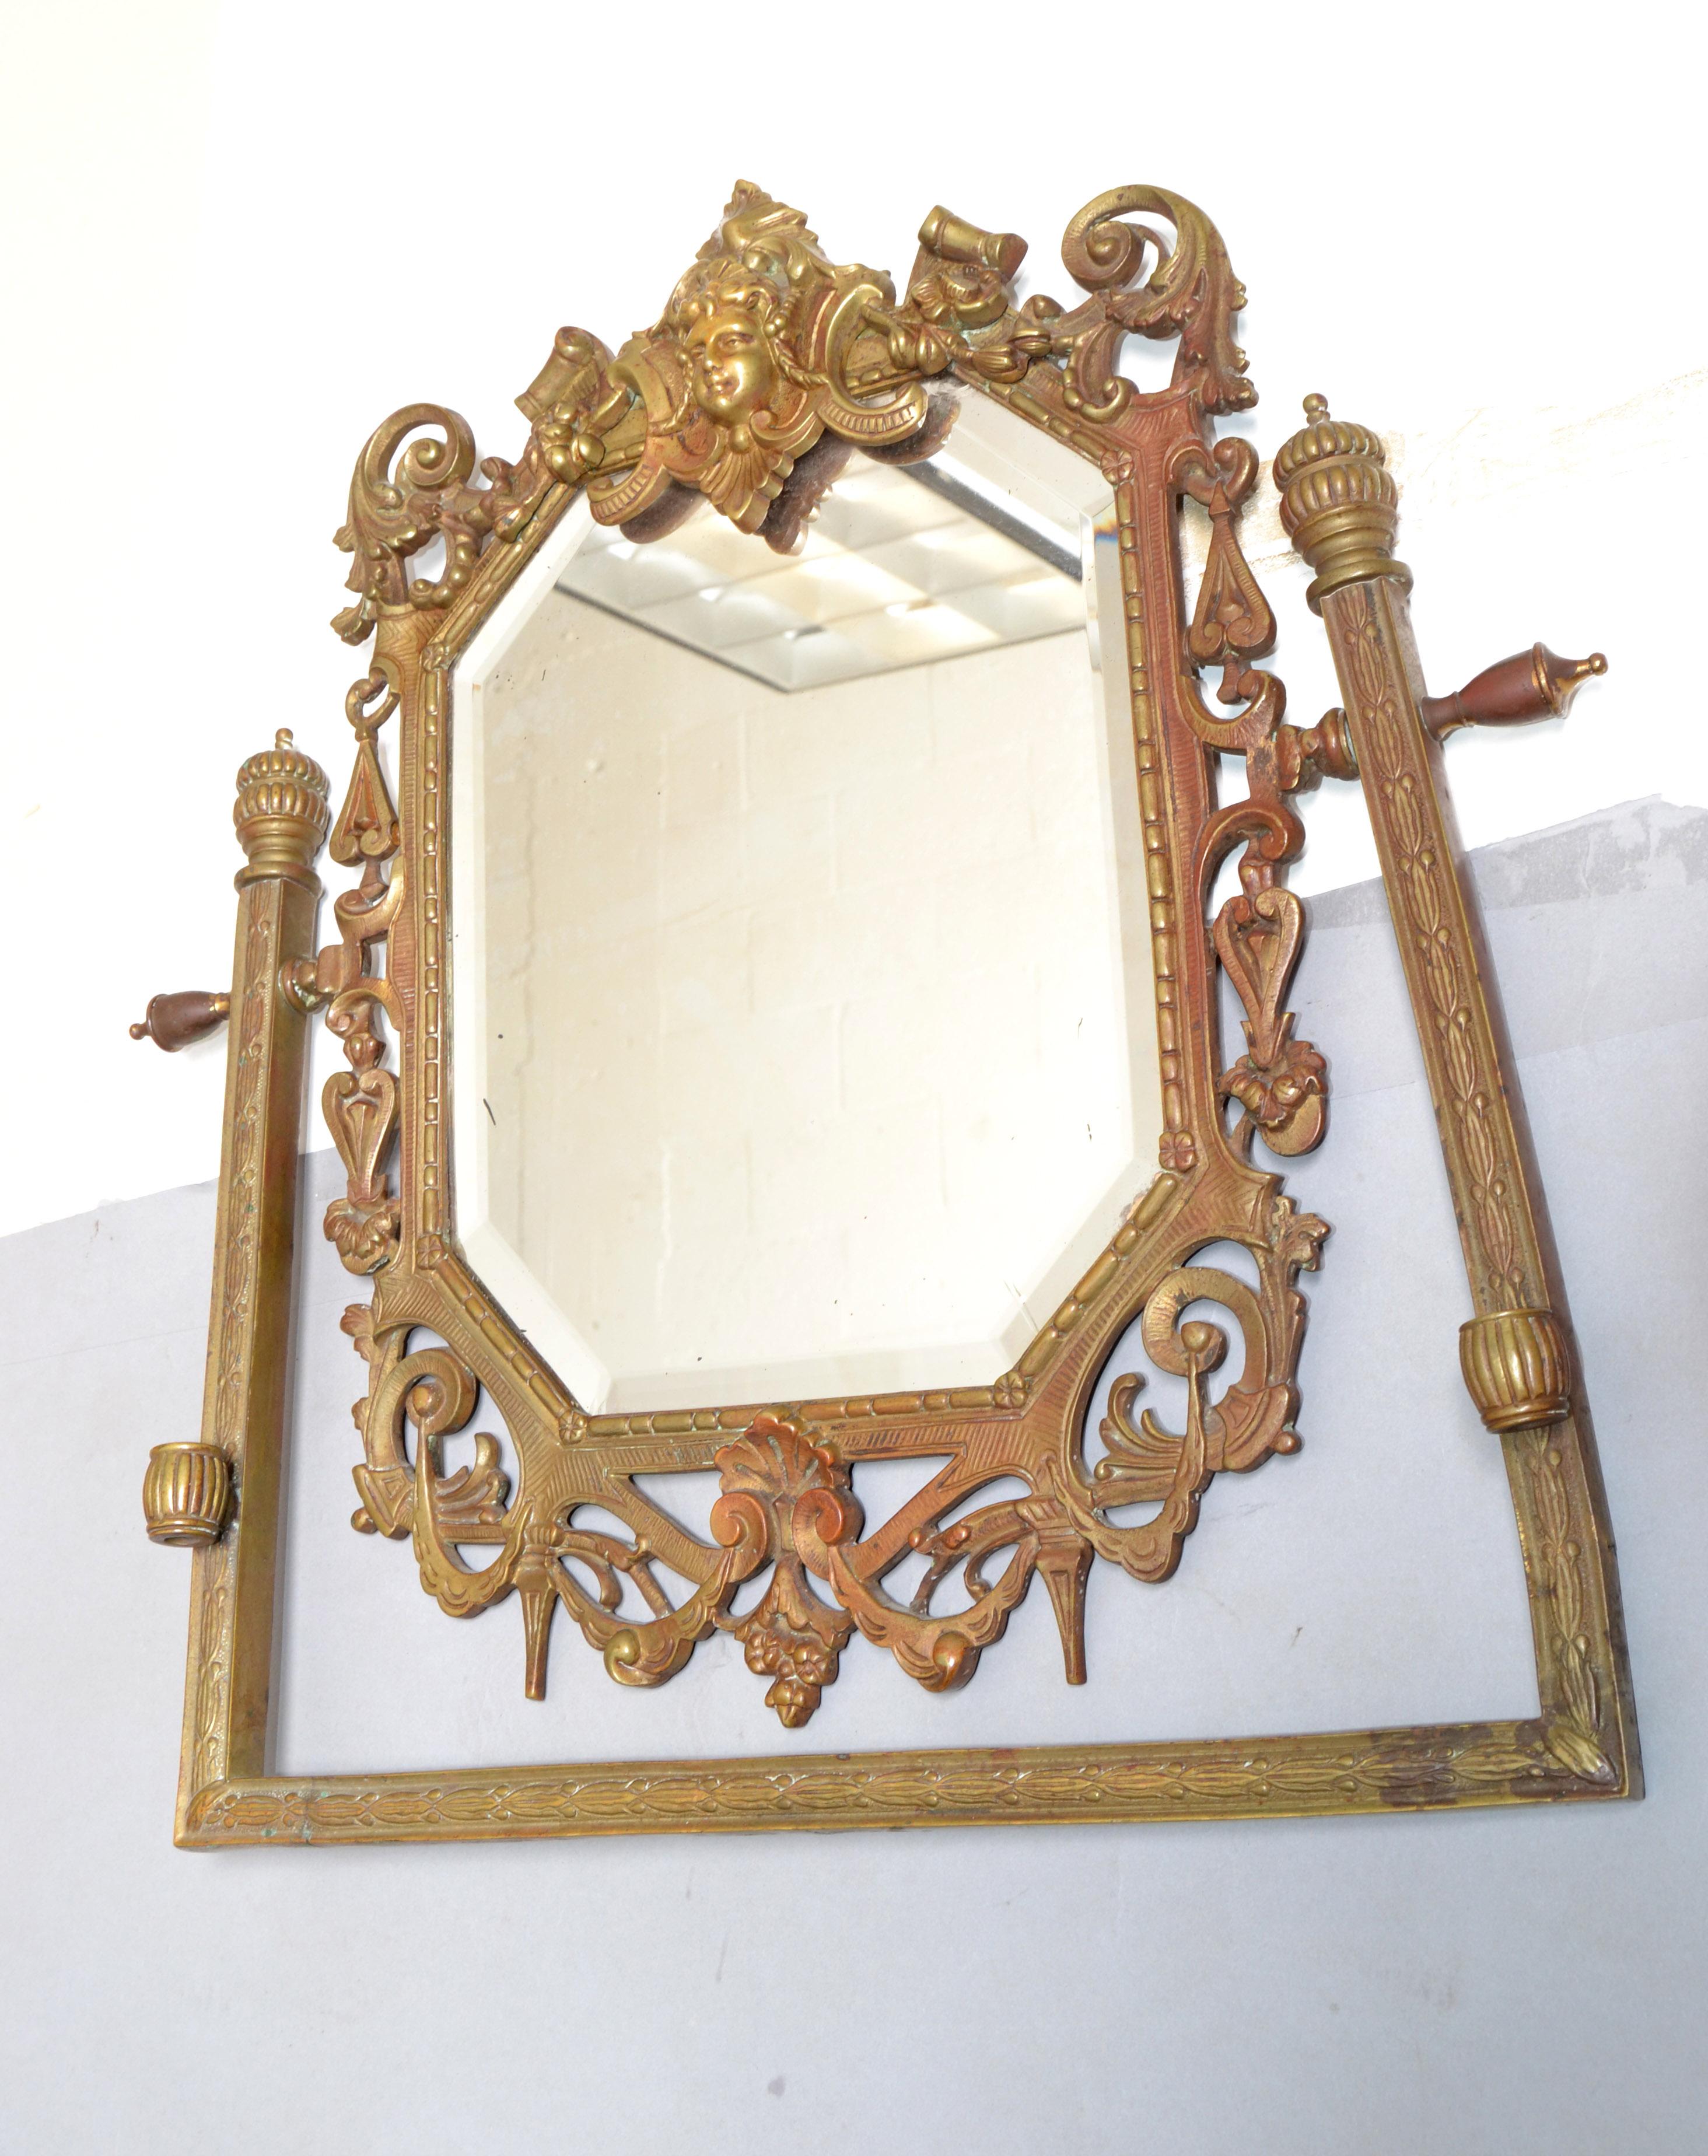 French Baroque Bronze rectangle wall mirror ornate and decorated with Angel, acanthus leaf and scalloped shell design. 
The original octagonal Mirror Glass is beveled and shows some age-related foxing.
We believe it is dated to the late 19th